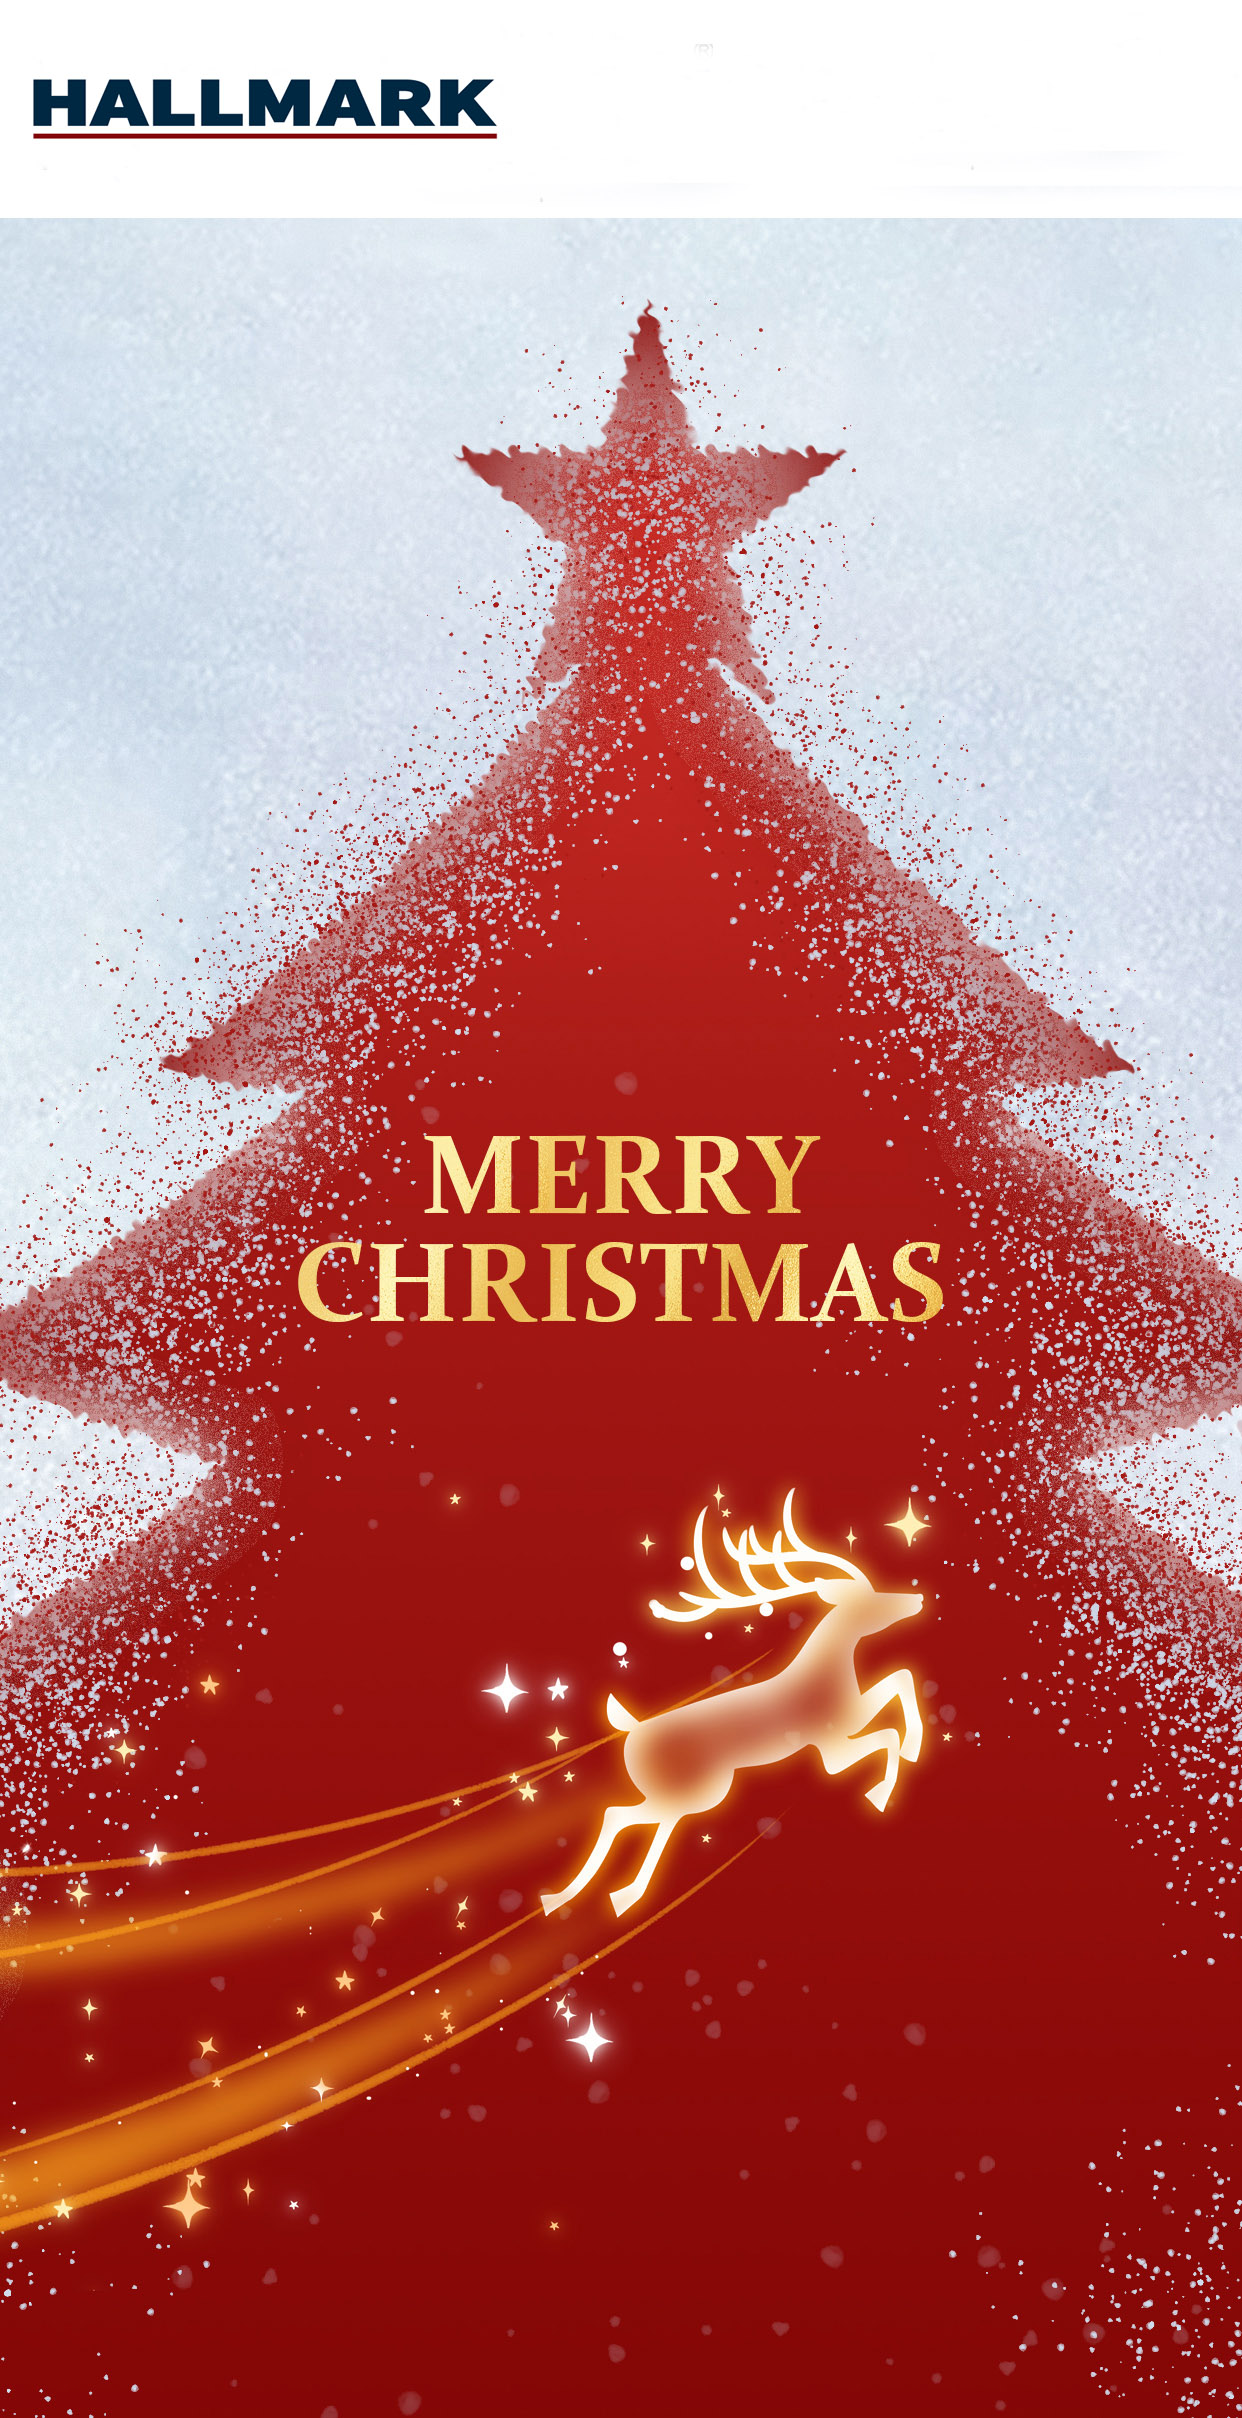 Unique Christmas Greetings To Our Customers